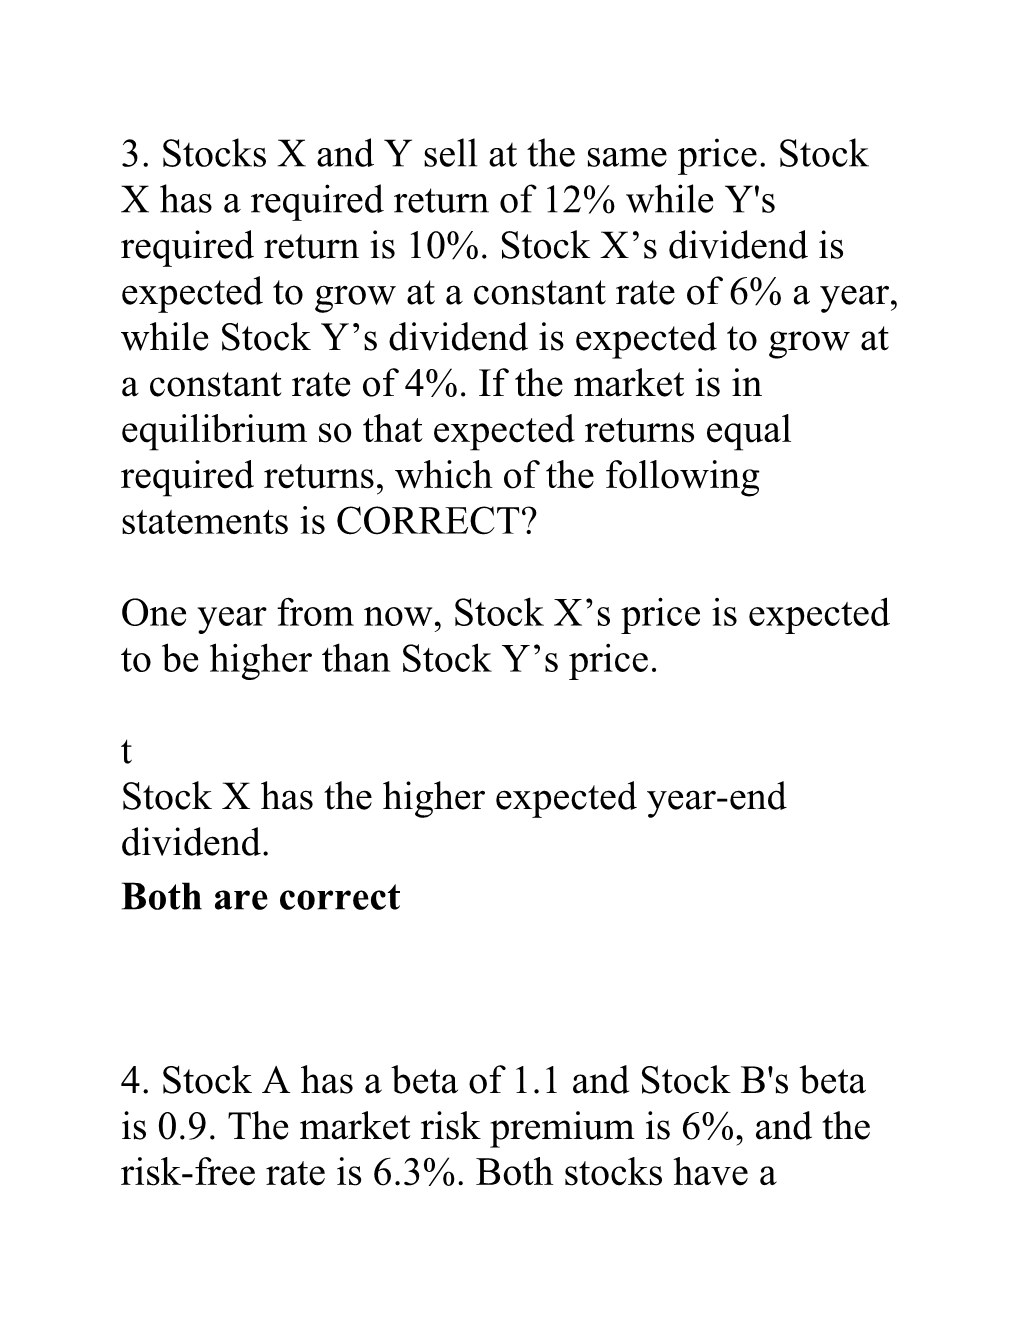 3. Stocks X and Y Sell at the Same Price. Stock X Has a Required Return of 12% While Y's